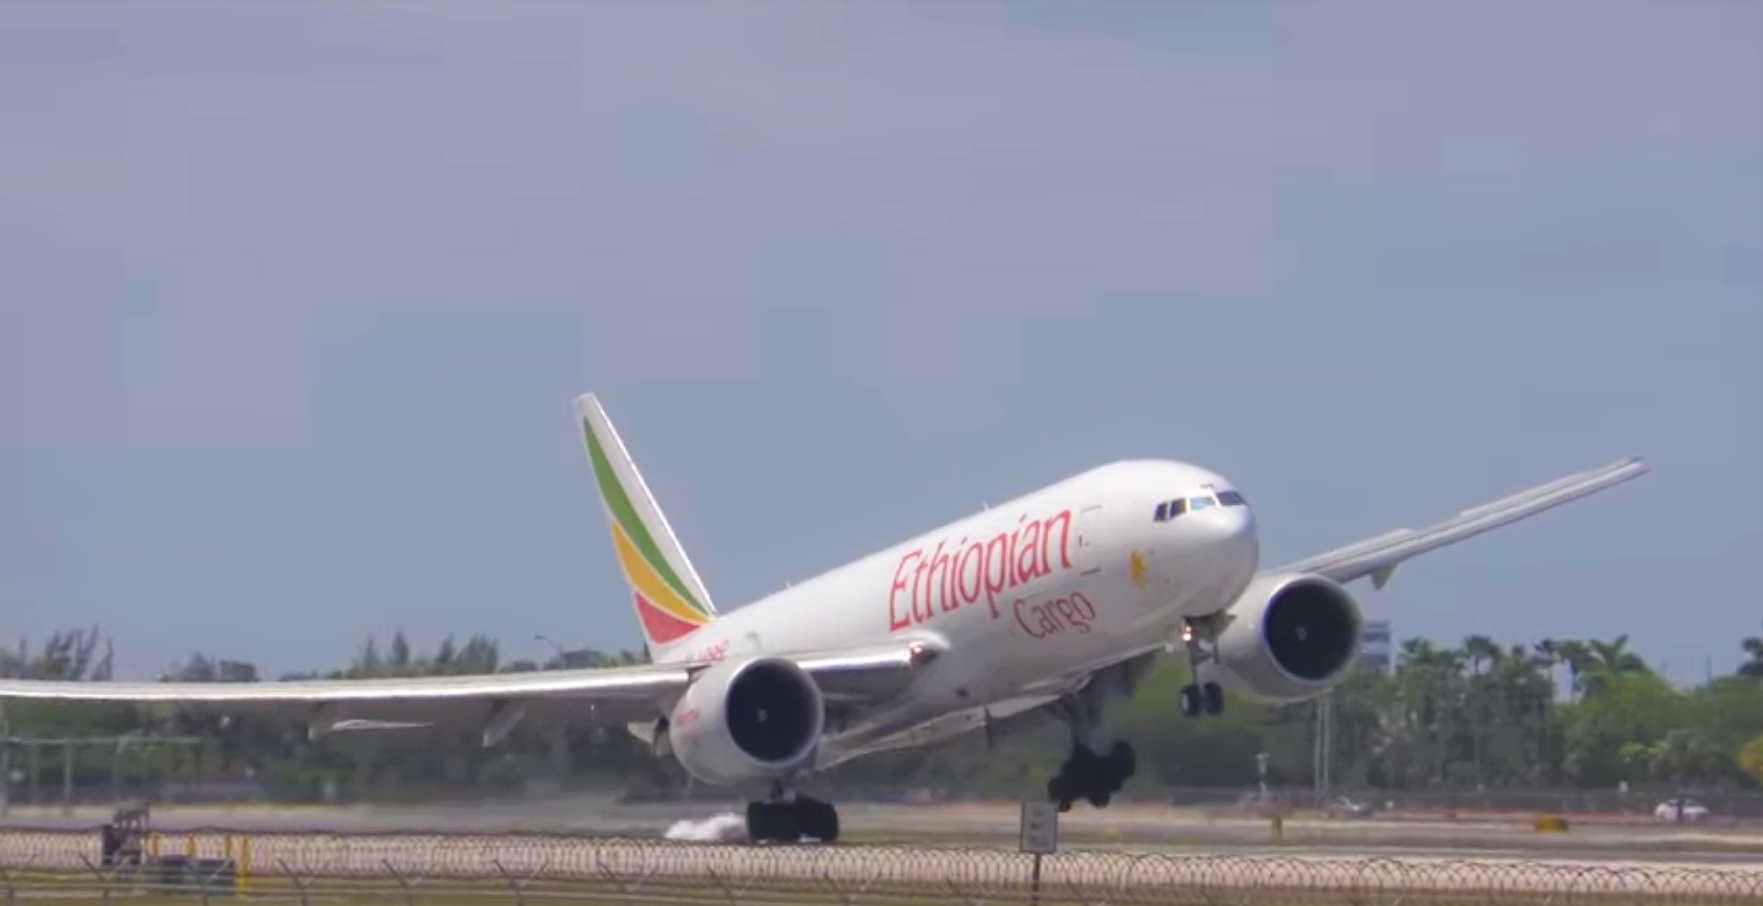 5.5 years  old   Ethiopian  B777   Freighter  makes  a  thrilling  Hard Landing  at  Miami Int'l Airport  !